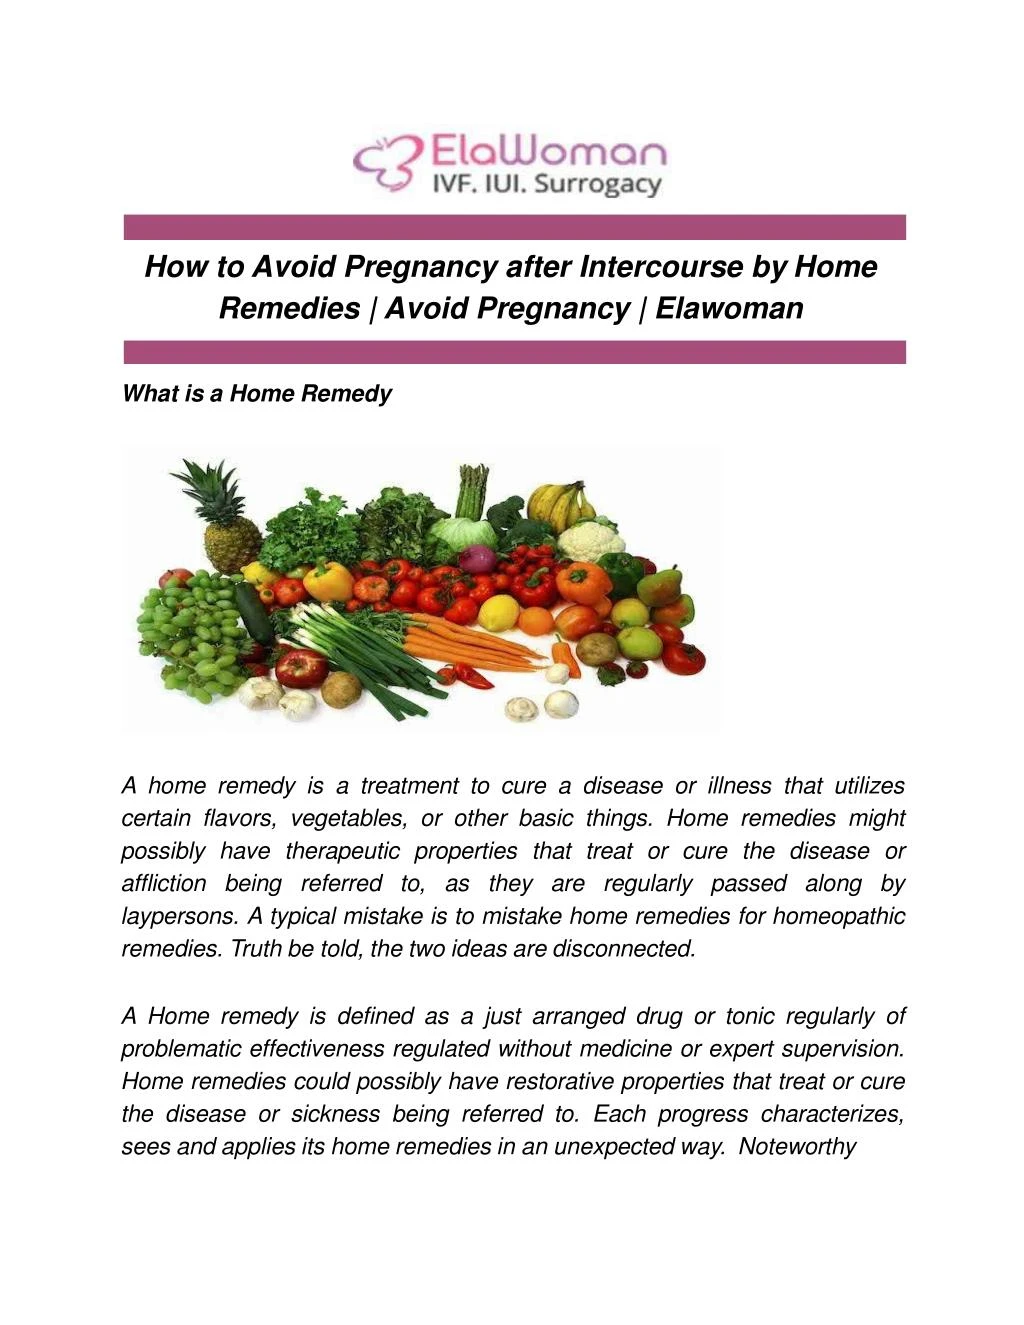 Ppt How To Avoid Pregnancy After Intercourse By Home Remedies Avoid